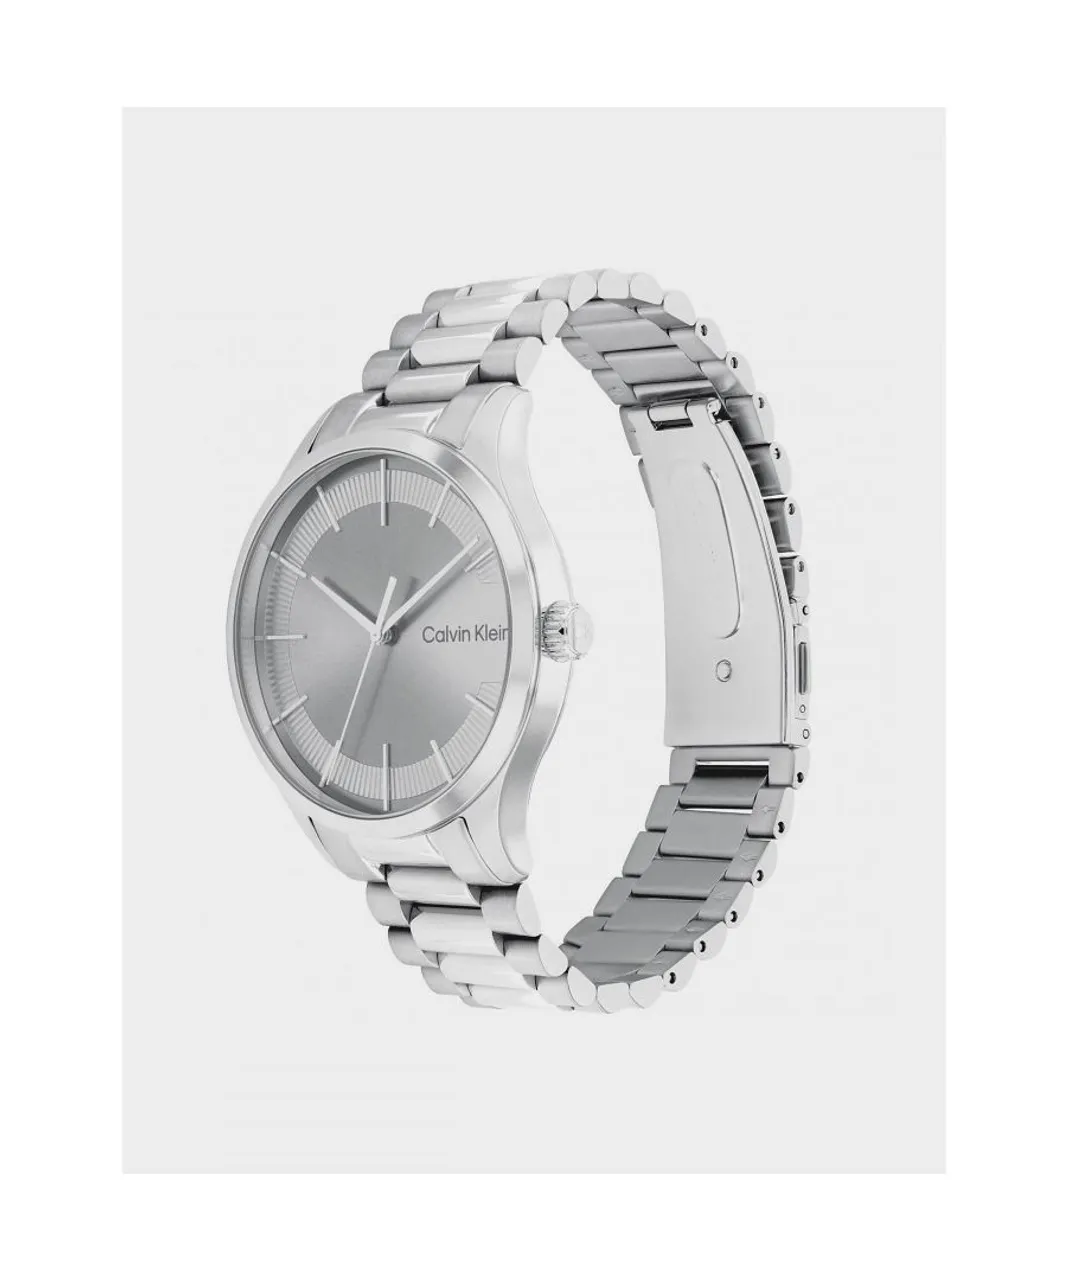 Calvin Klein Mens Accessories Iconic Bracelet Watch in Silver Stainless Steel - One Size